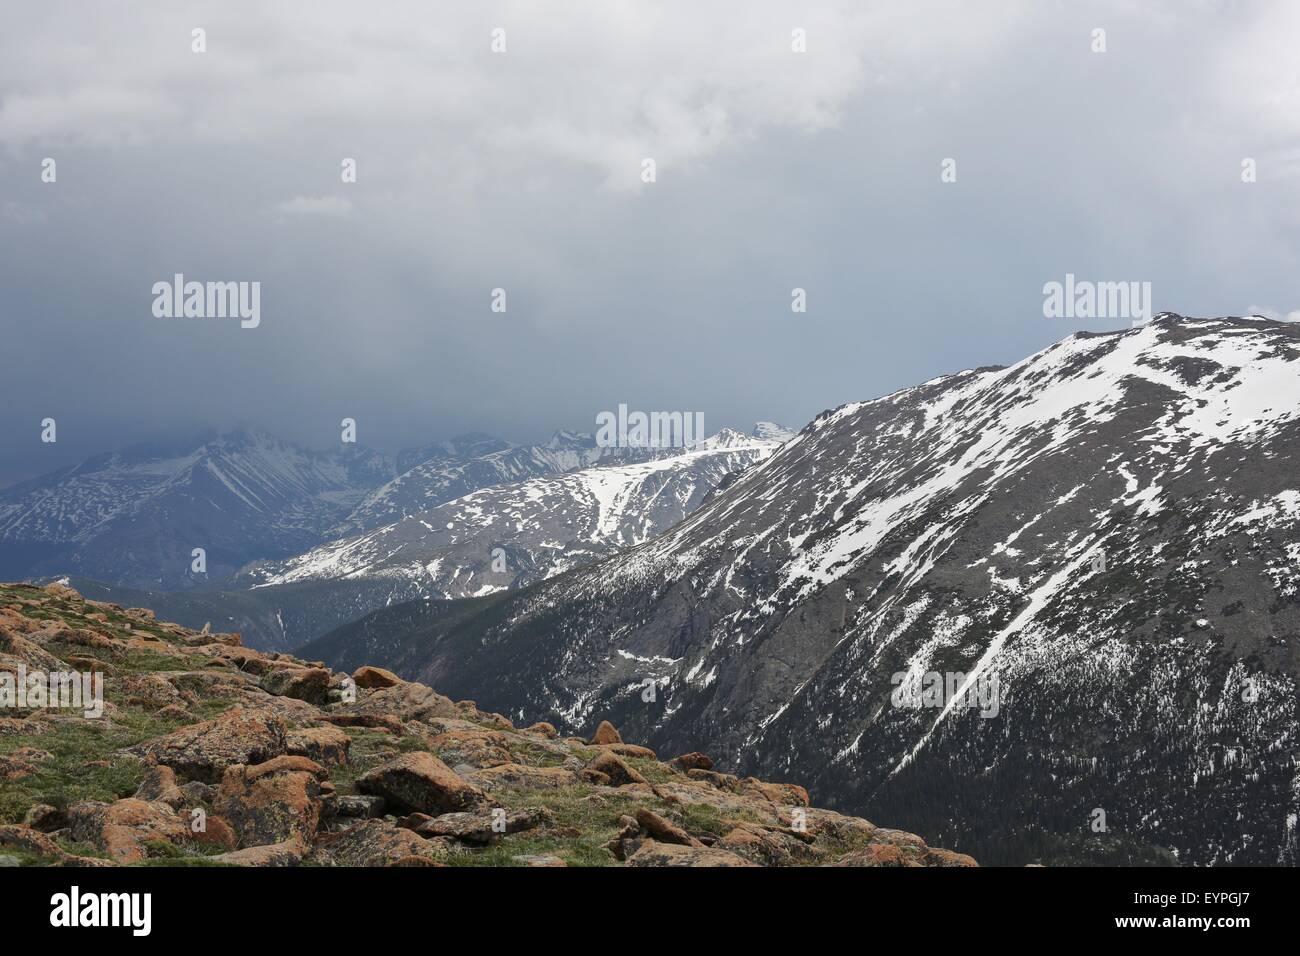 A view of the mountains at Rocky Mountain National Park in Colorado. Stock Photo